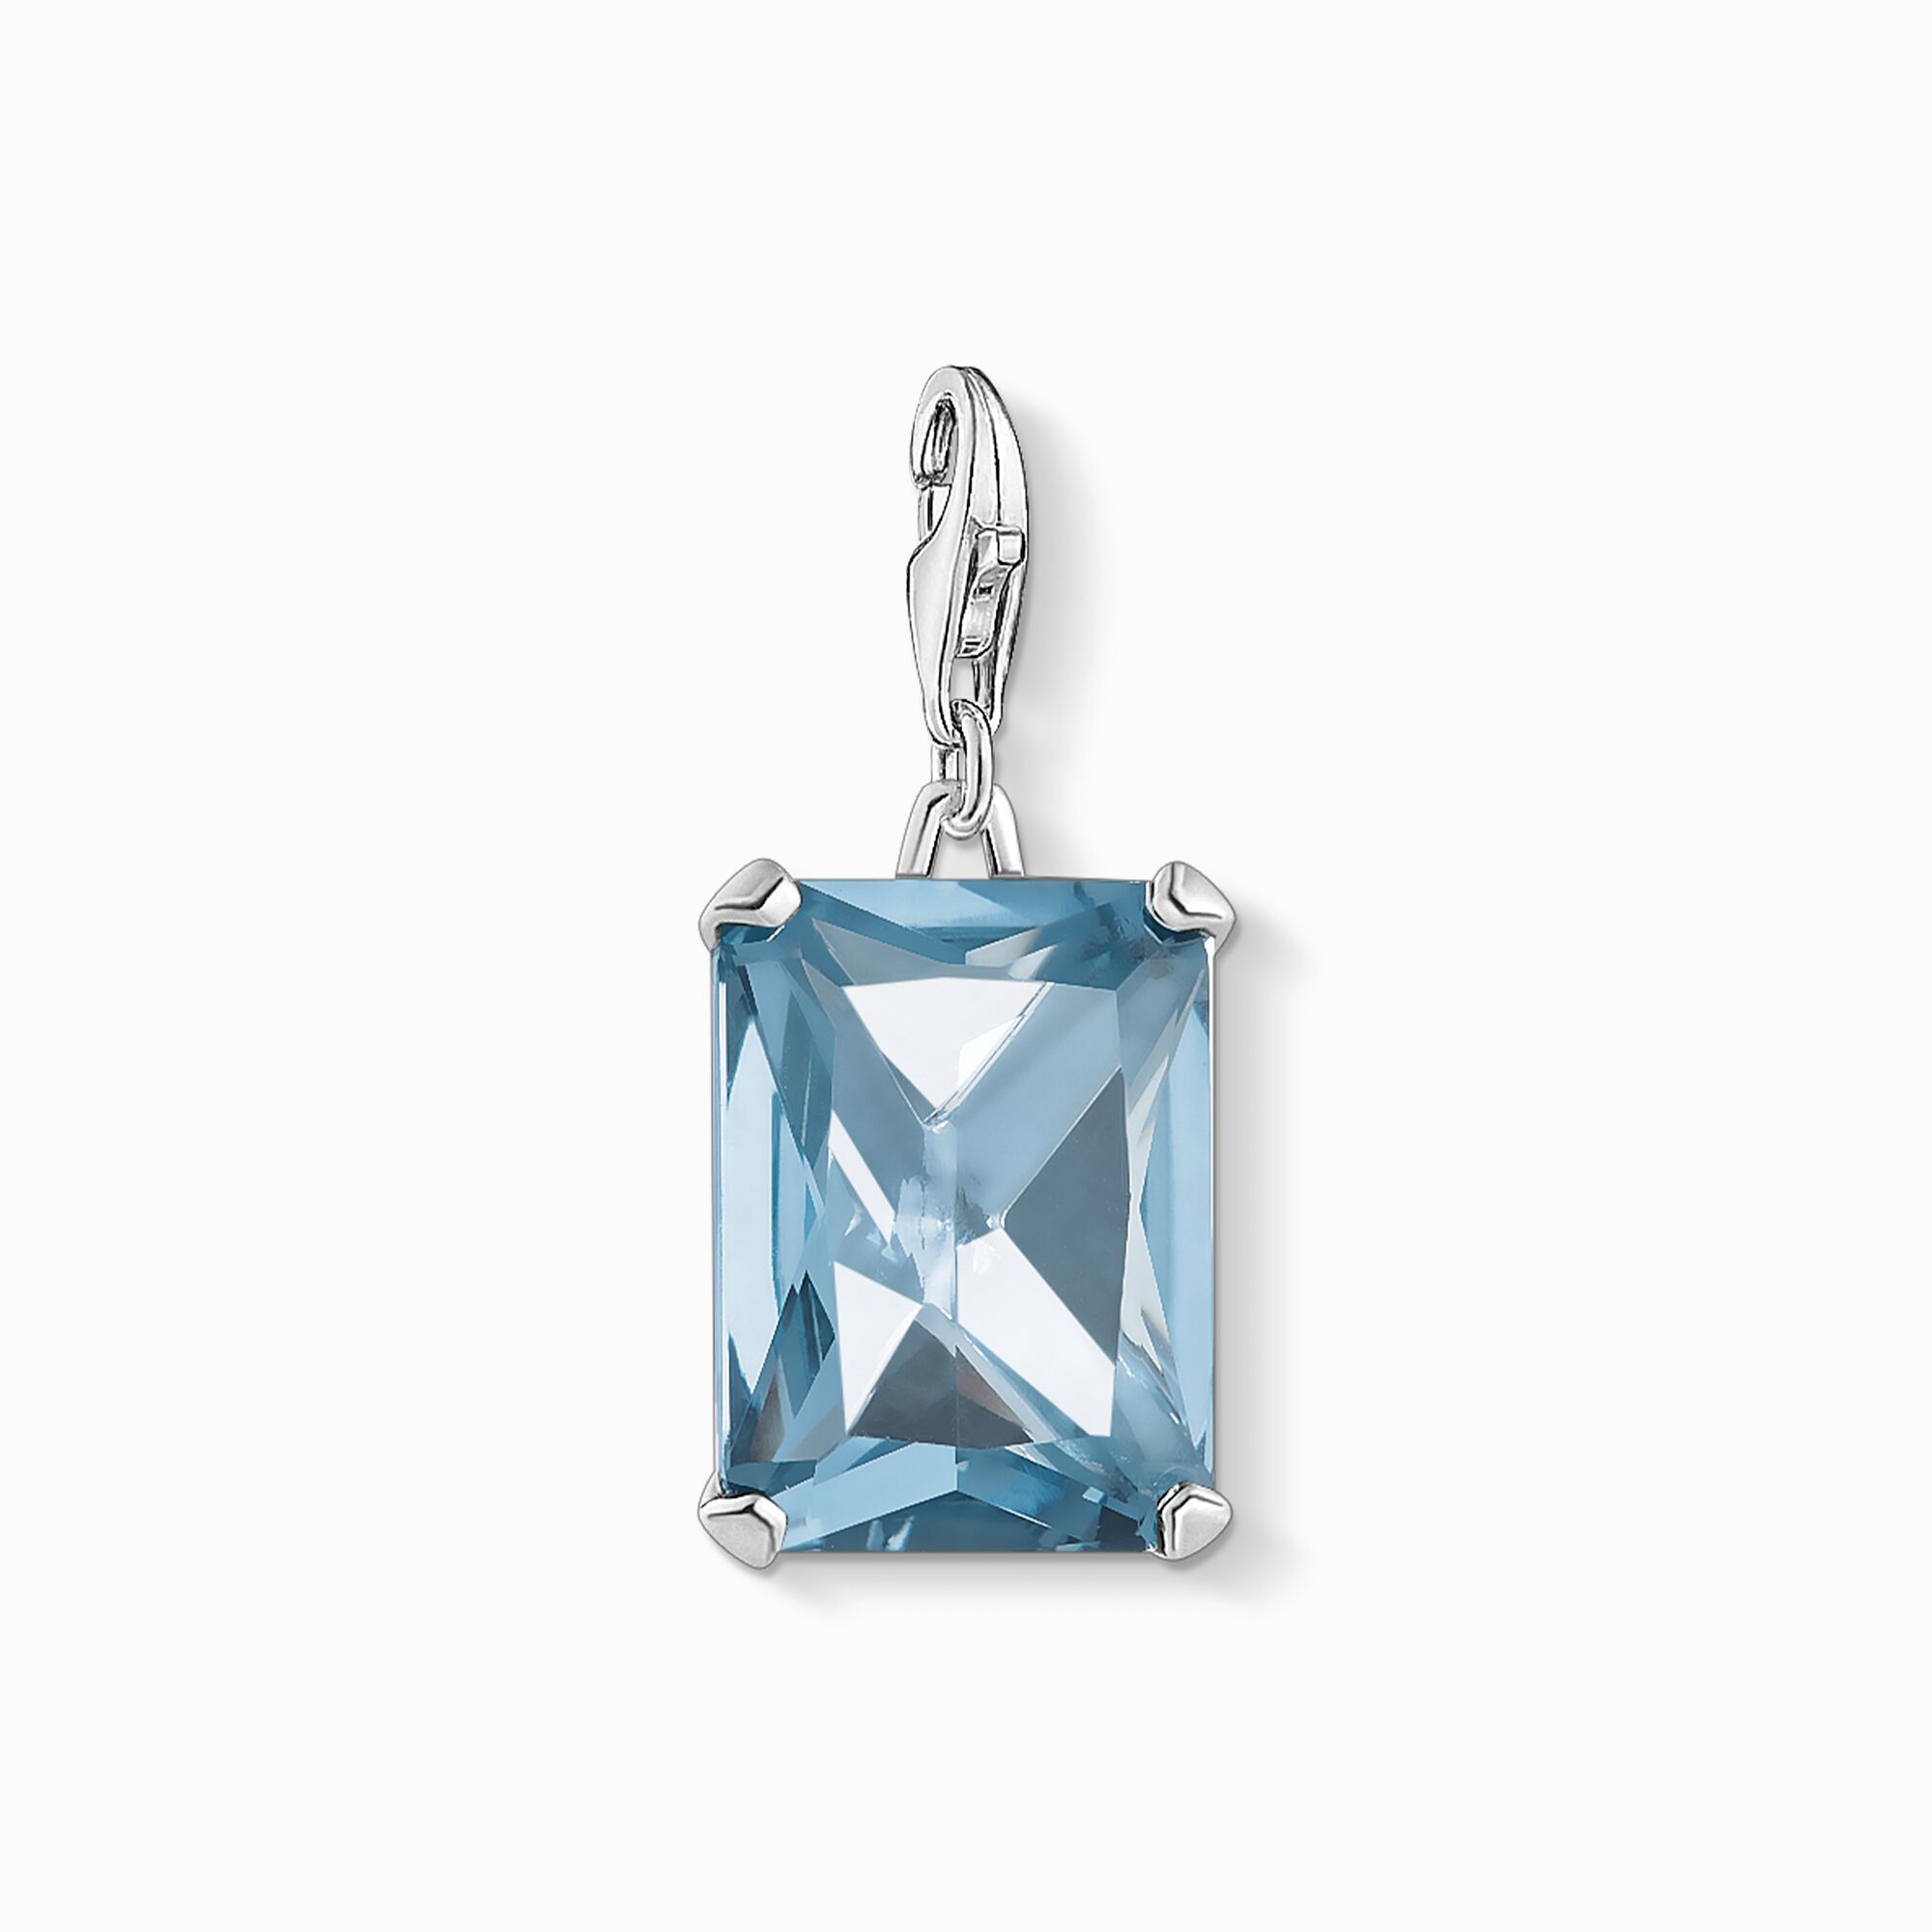 charm pendant large blue stone from the Charm Club collection in the THOMAS SABO online store